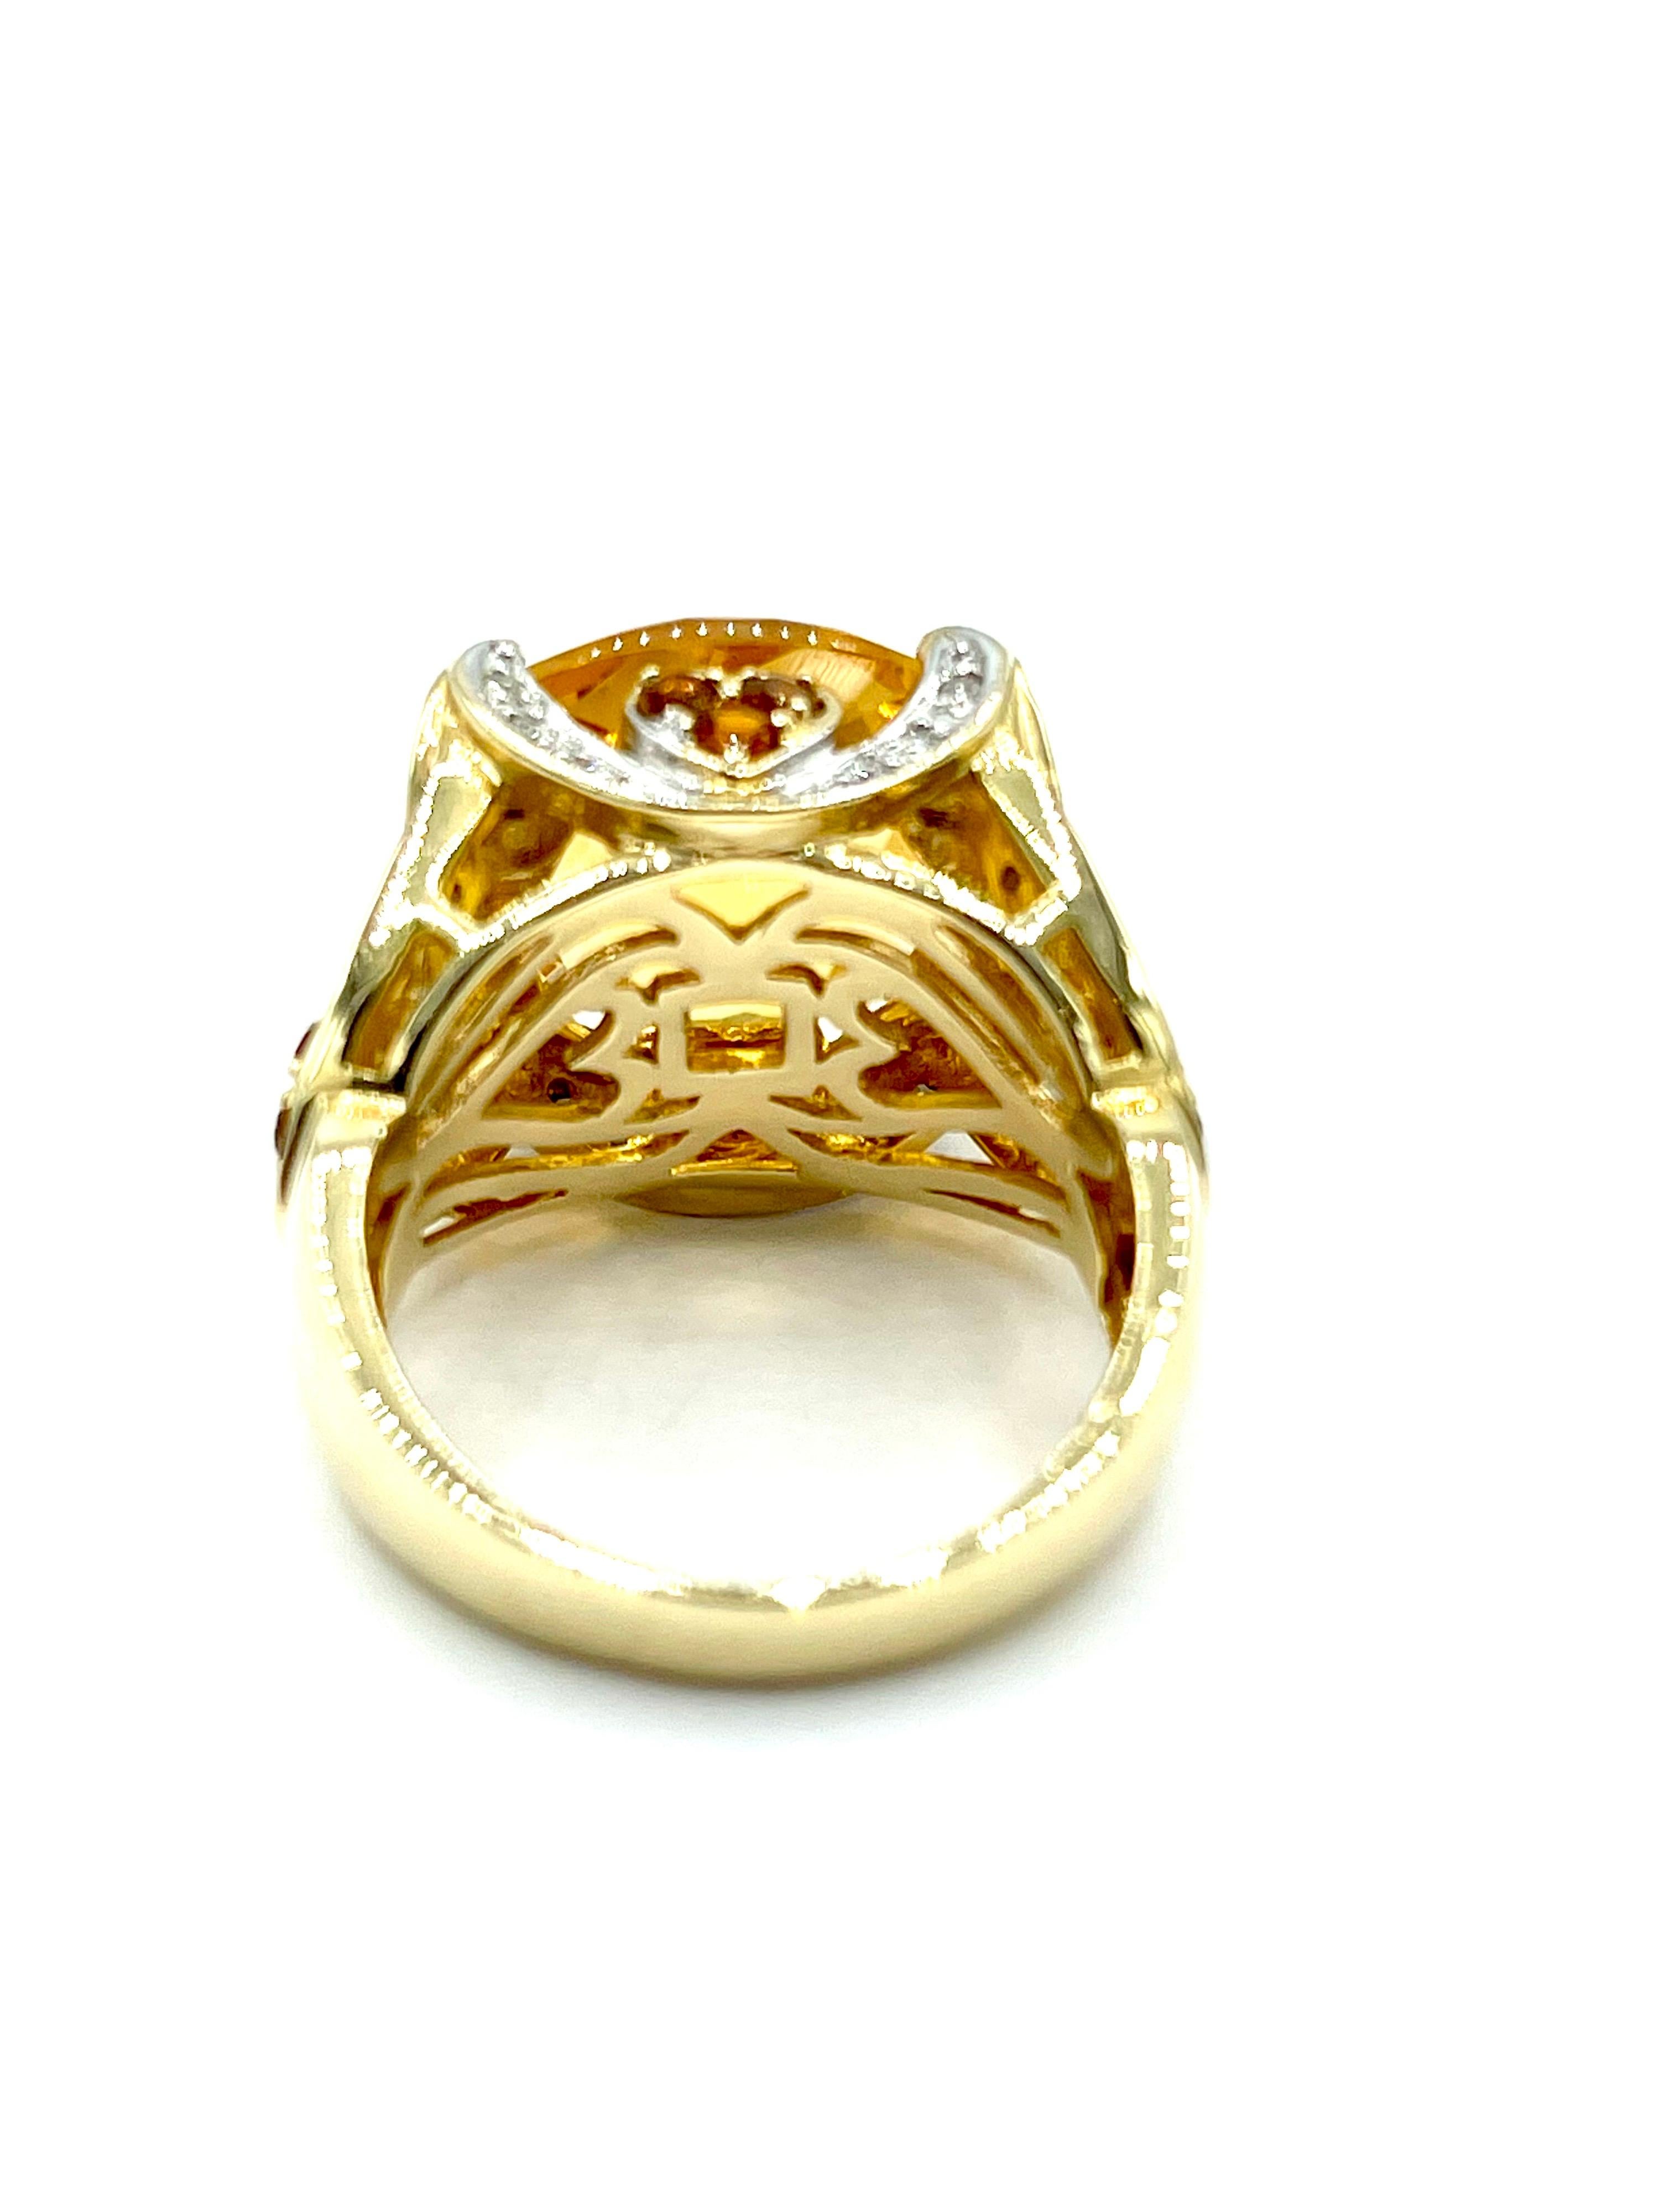 Cushion Cut 8.07 Carat Faceted Cushion Citrine and Diamond Yellow Gold Fashion Ring For Sale